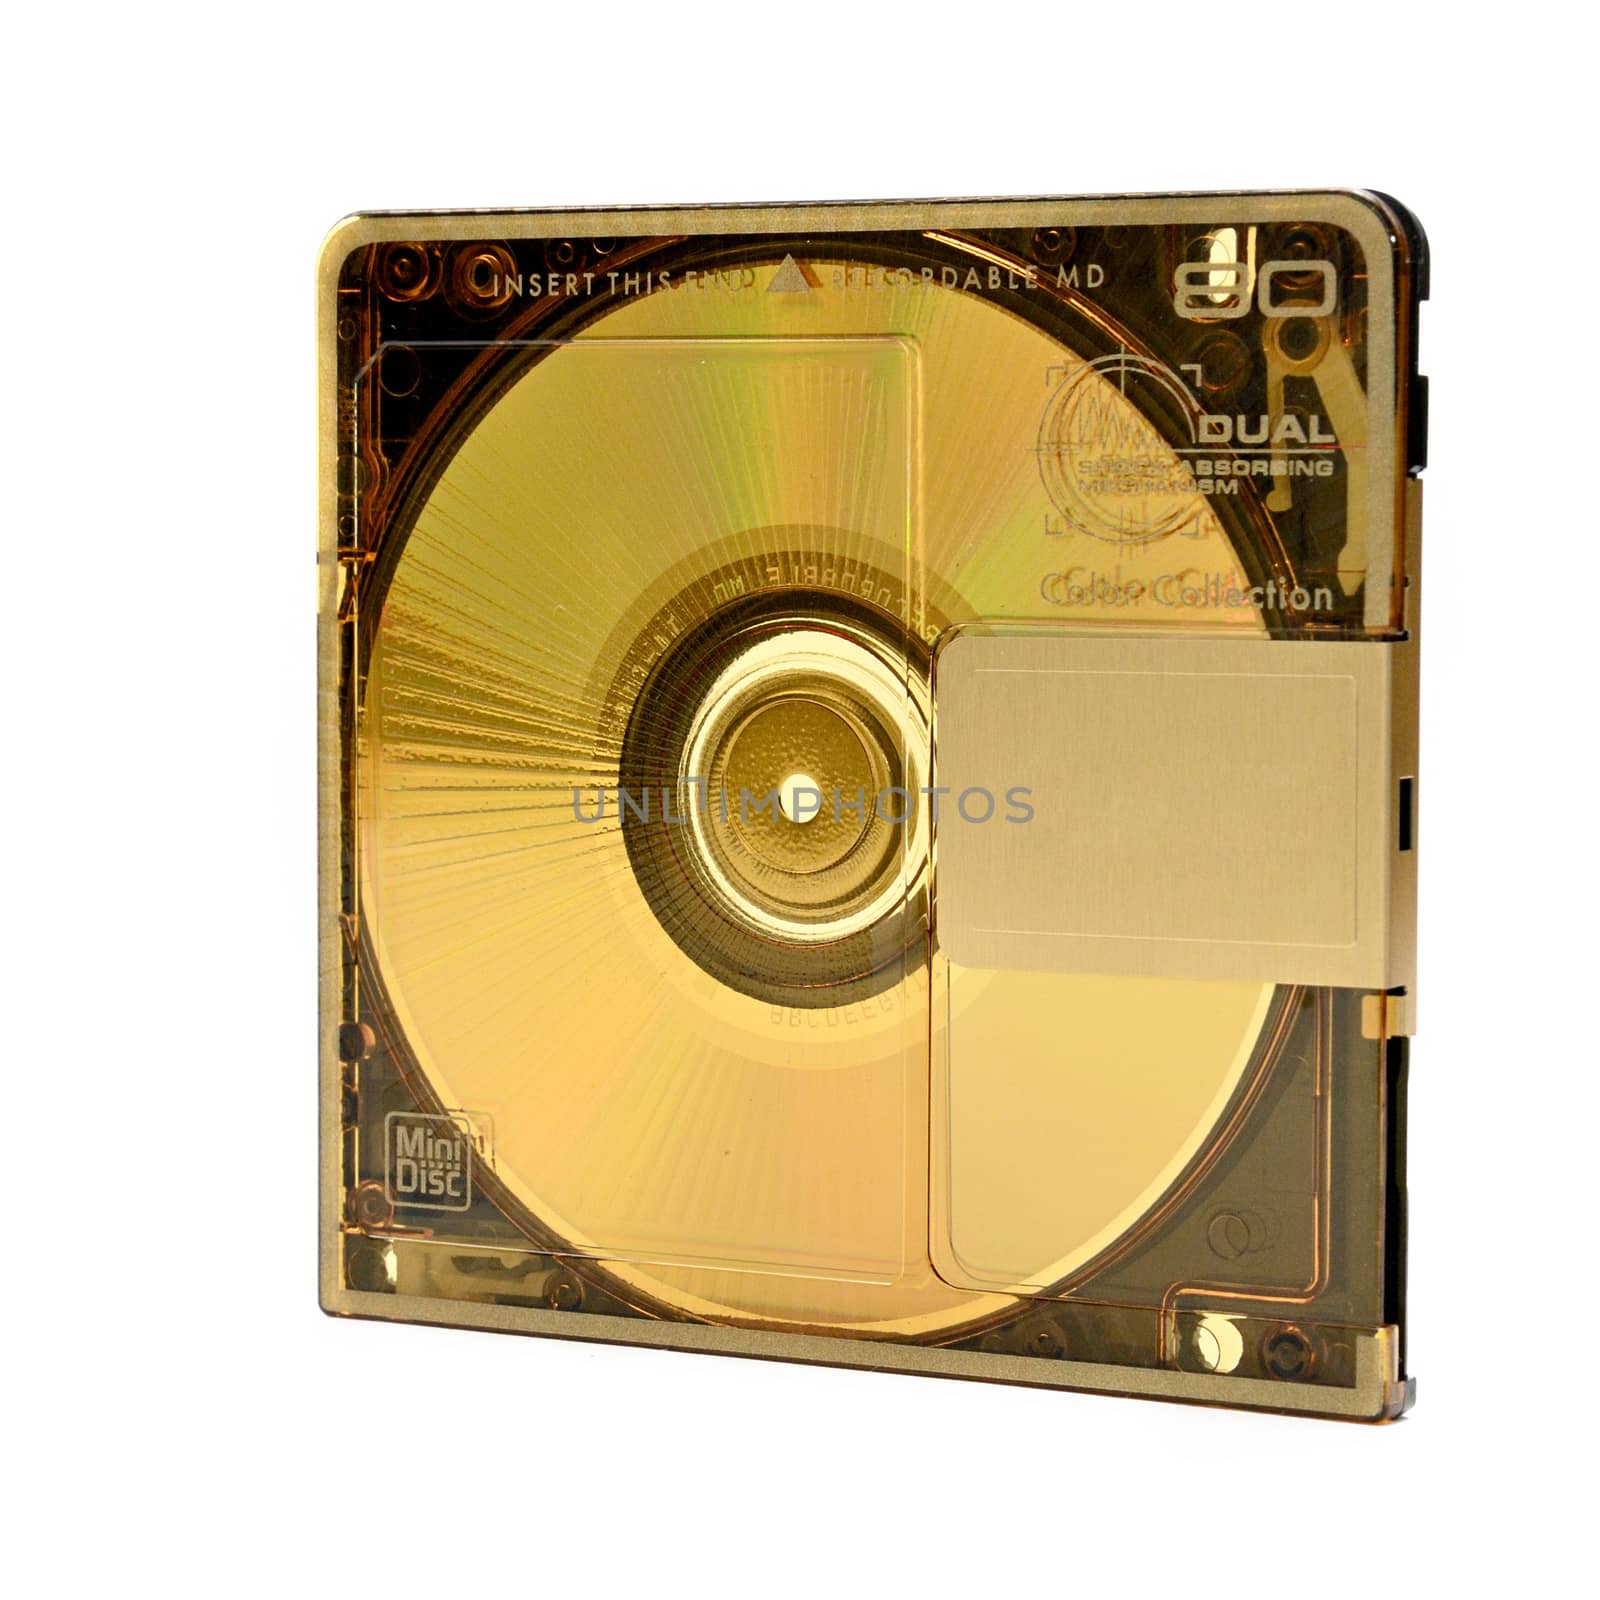 Compact rewritable Mini Disc- MD for digital recording released in the 90s on an isolated white background.